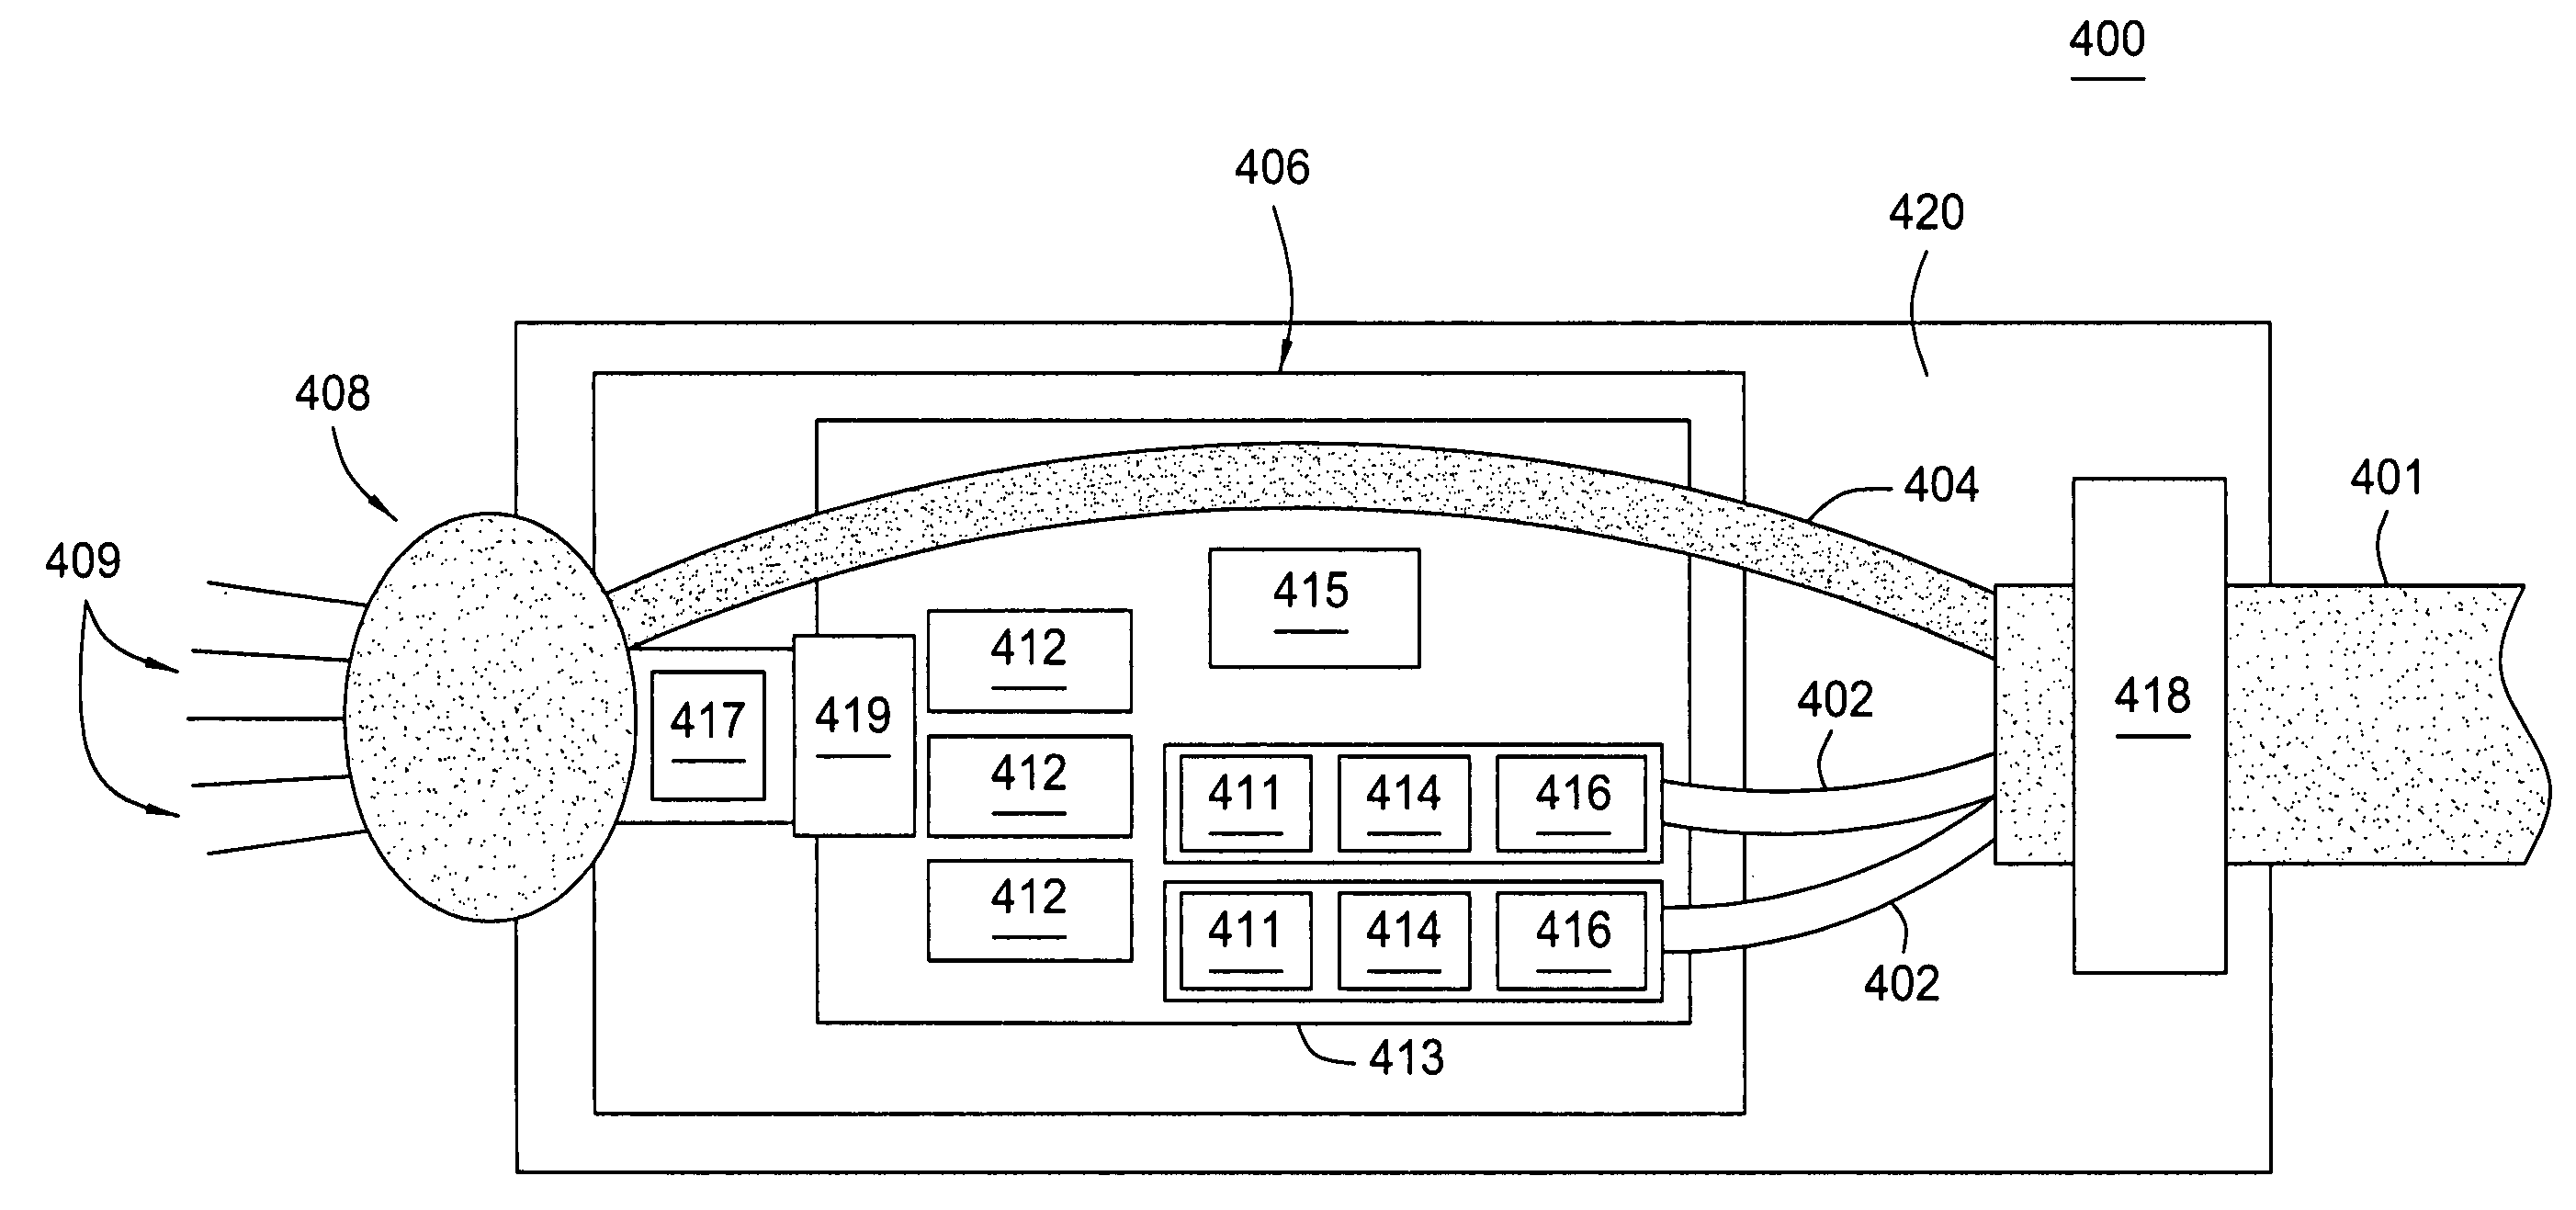 Optical harness assembly and method